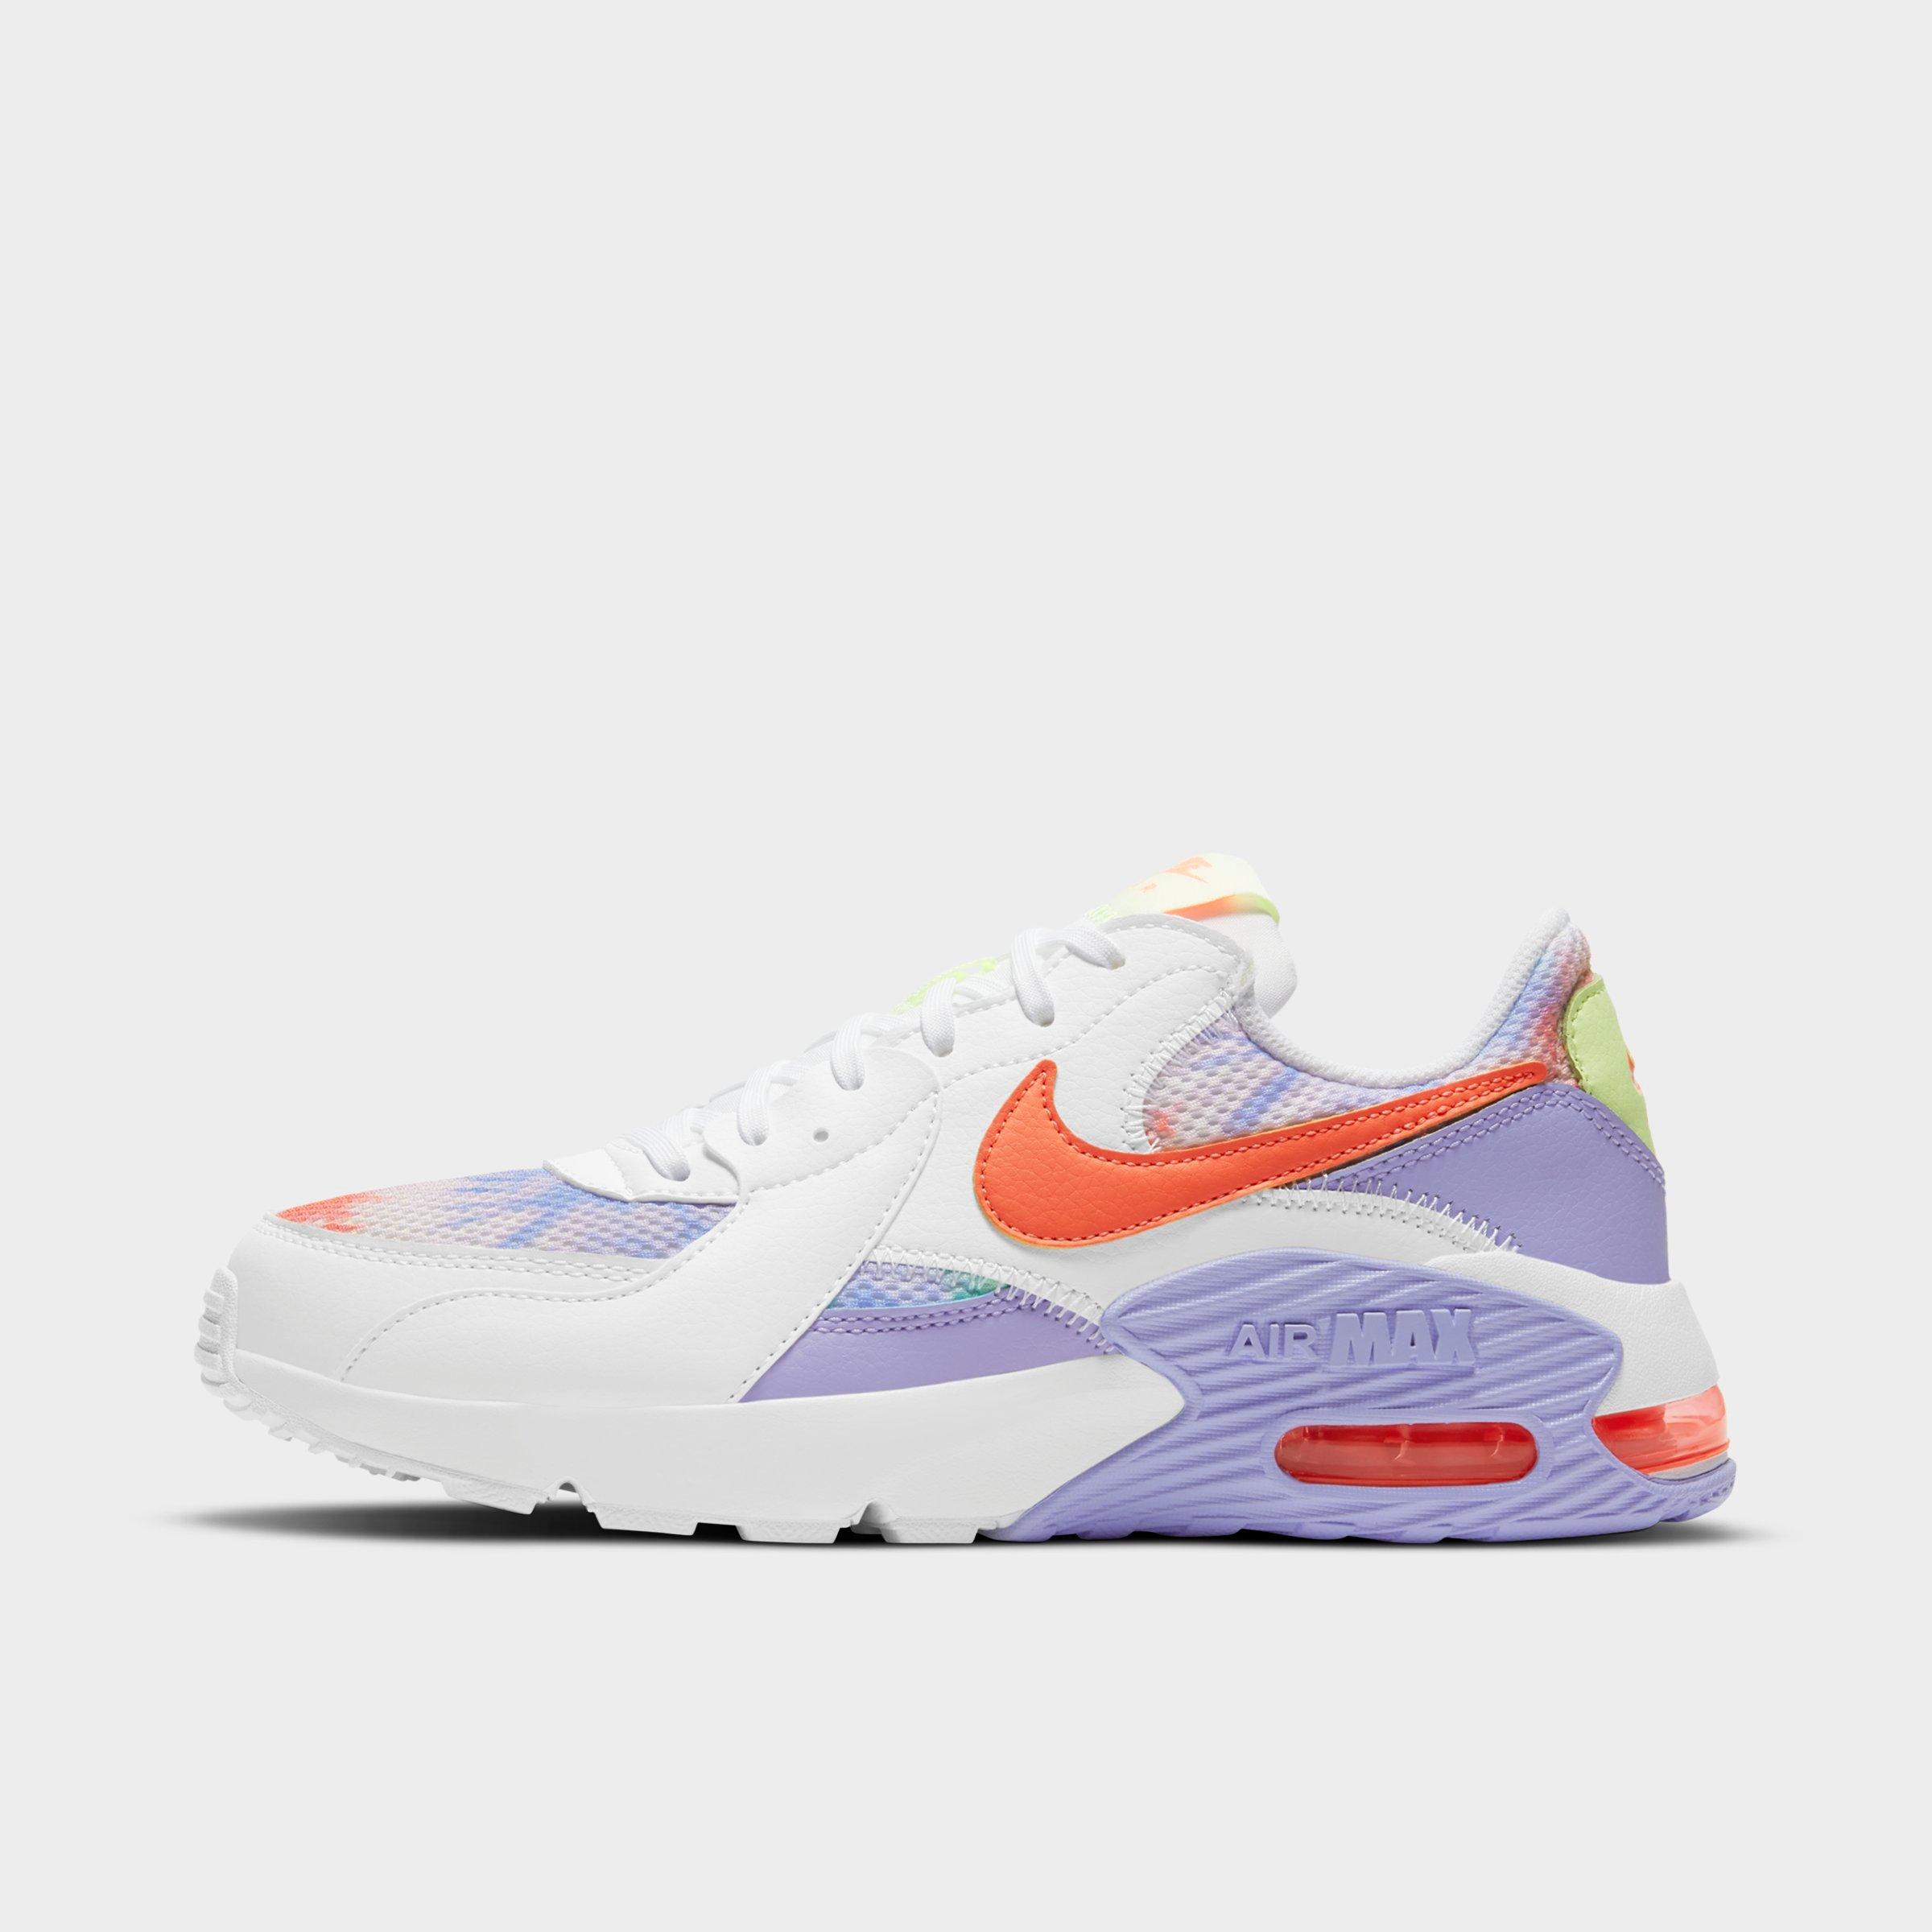 nike air max exceed womens